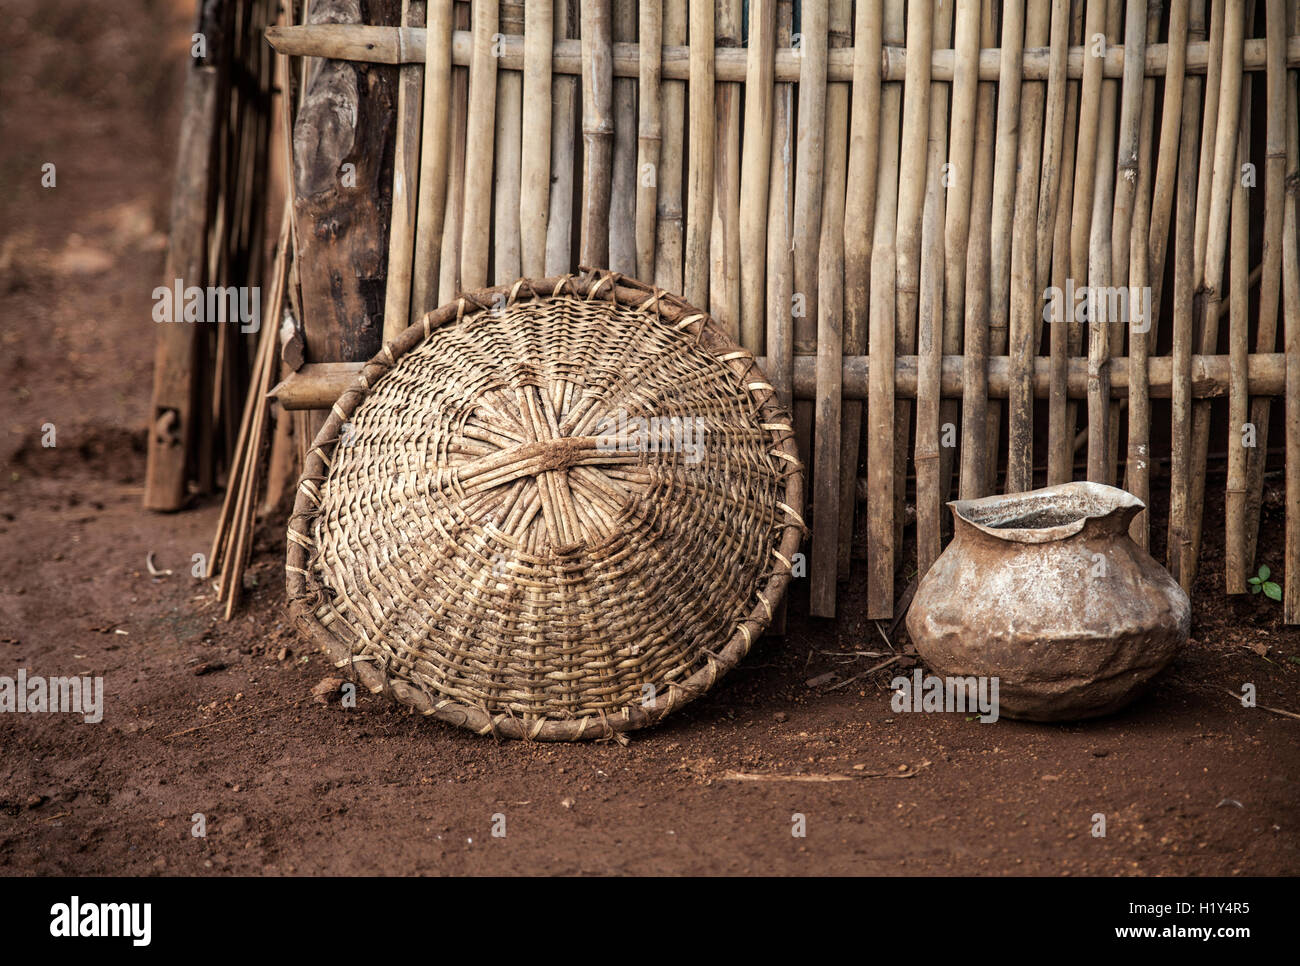 https://c8.alamy.com/comp/H1Y4R5/traditional-household-items-in-an-indigenous-village-in-india-H1Y4R5.jpg